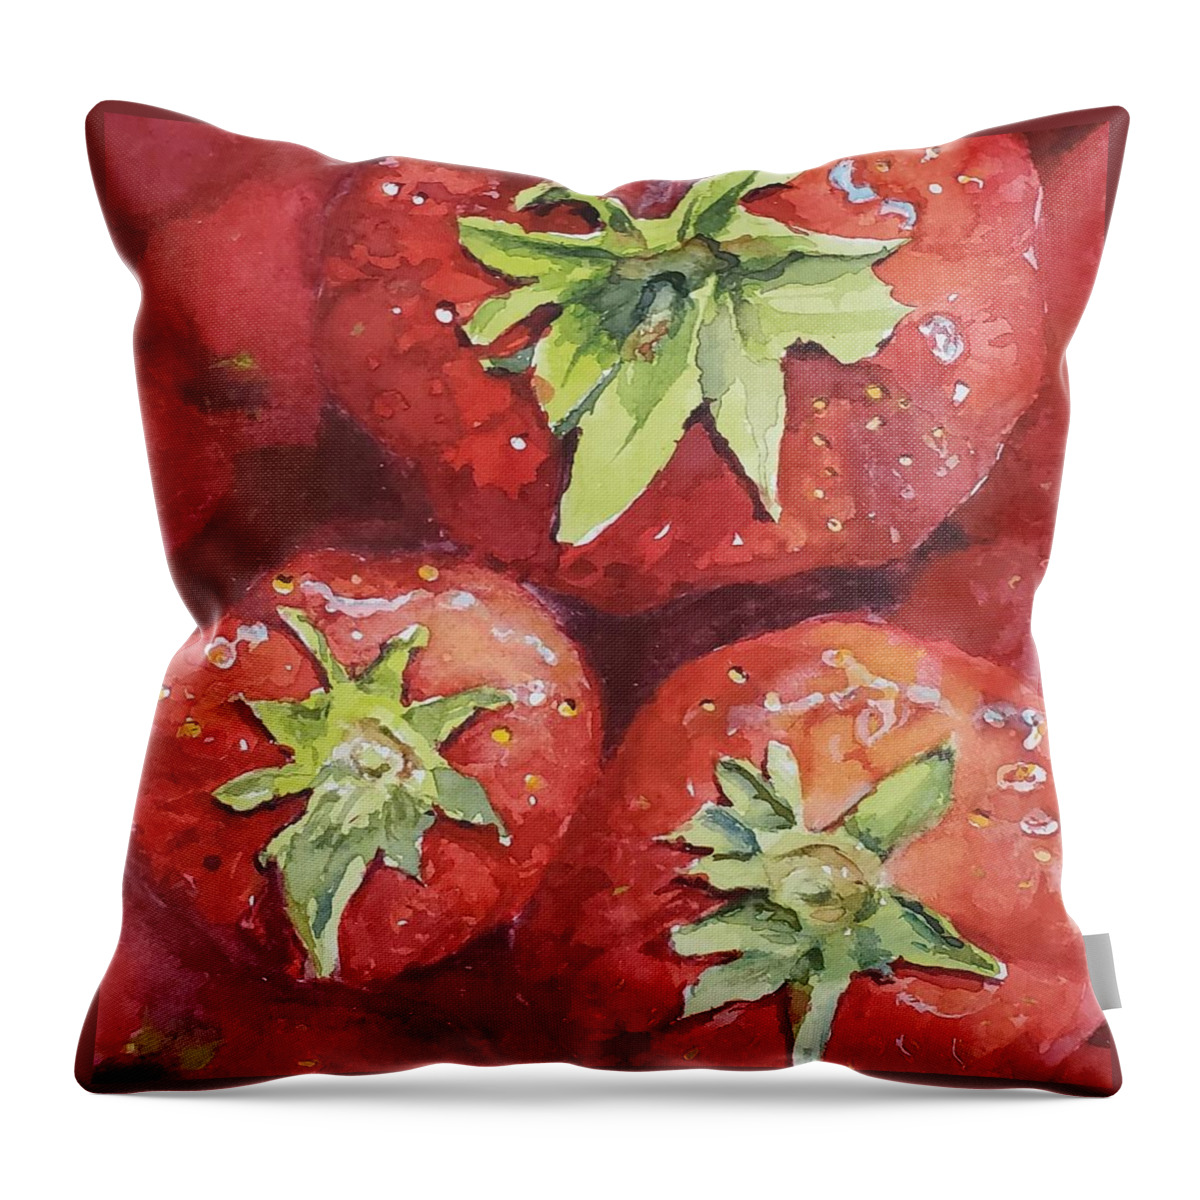 Still Life Throw Pillow featuring the painting Strawberries by Sheila Romard